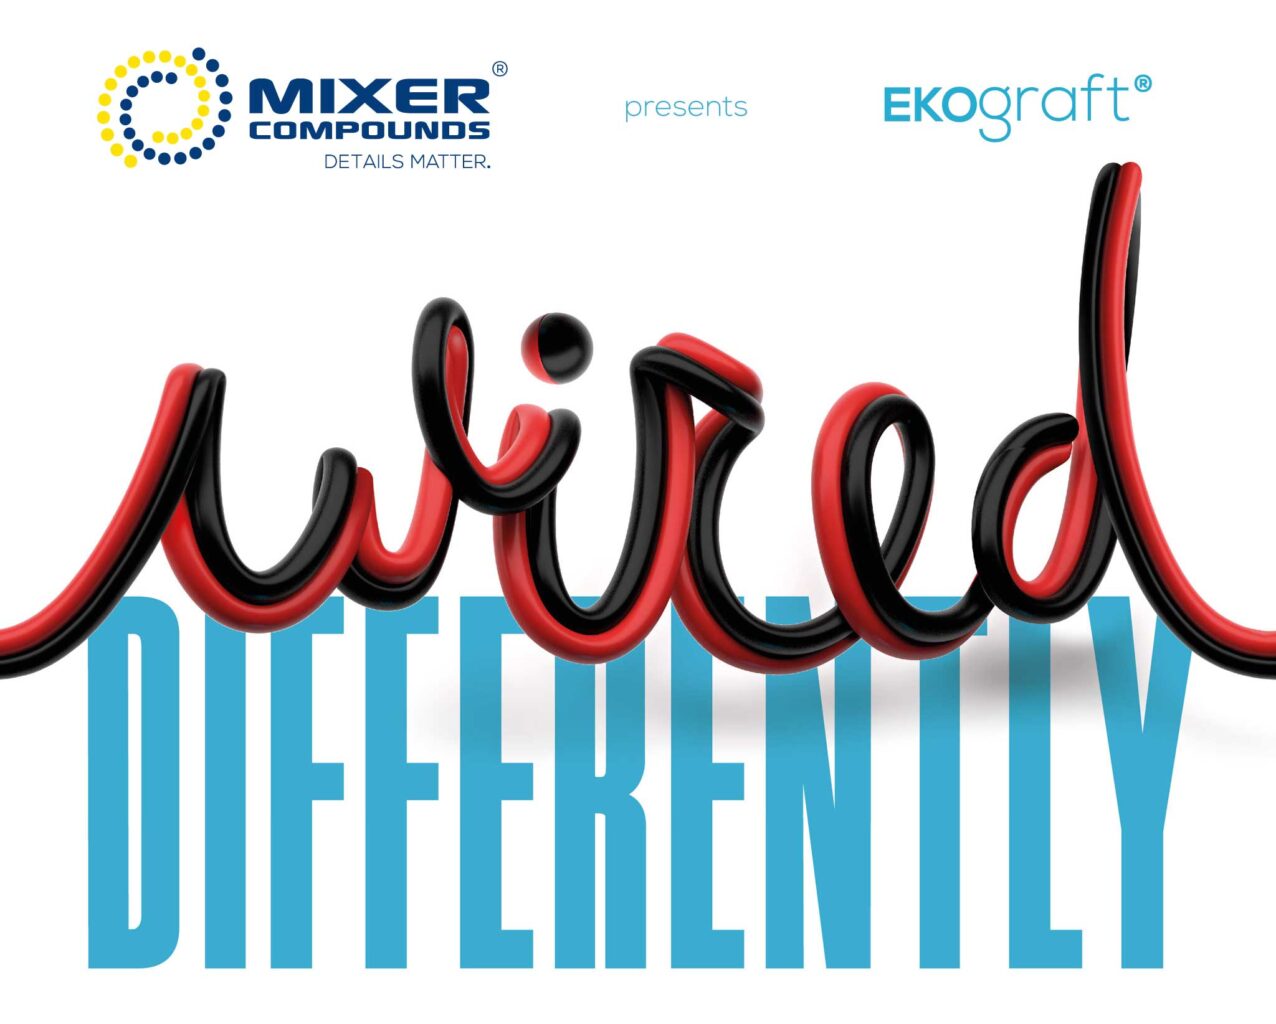 Mixer is wired differently